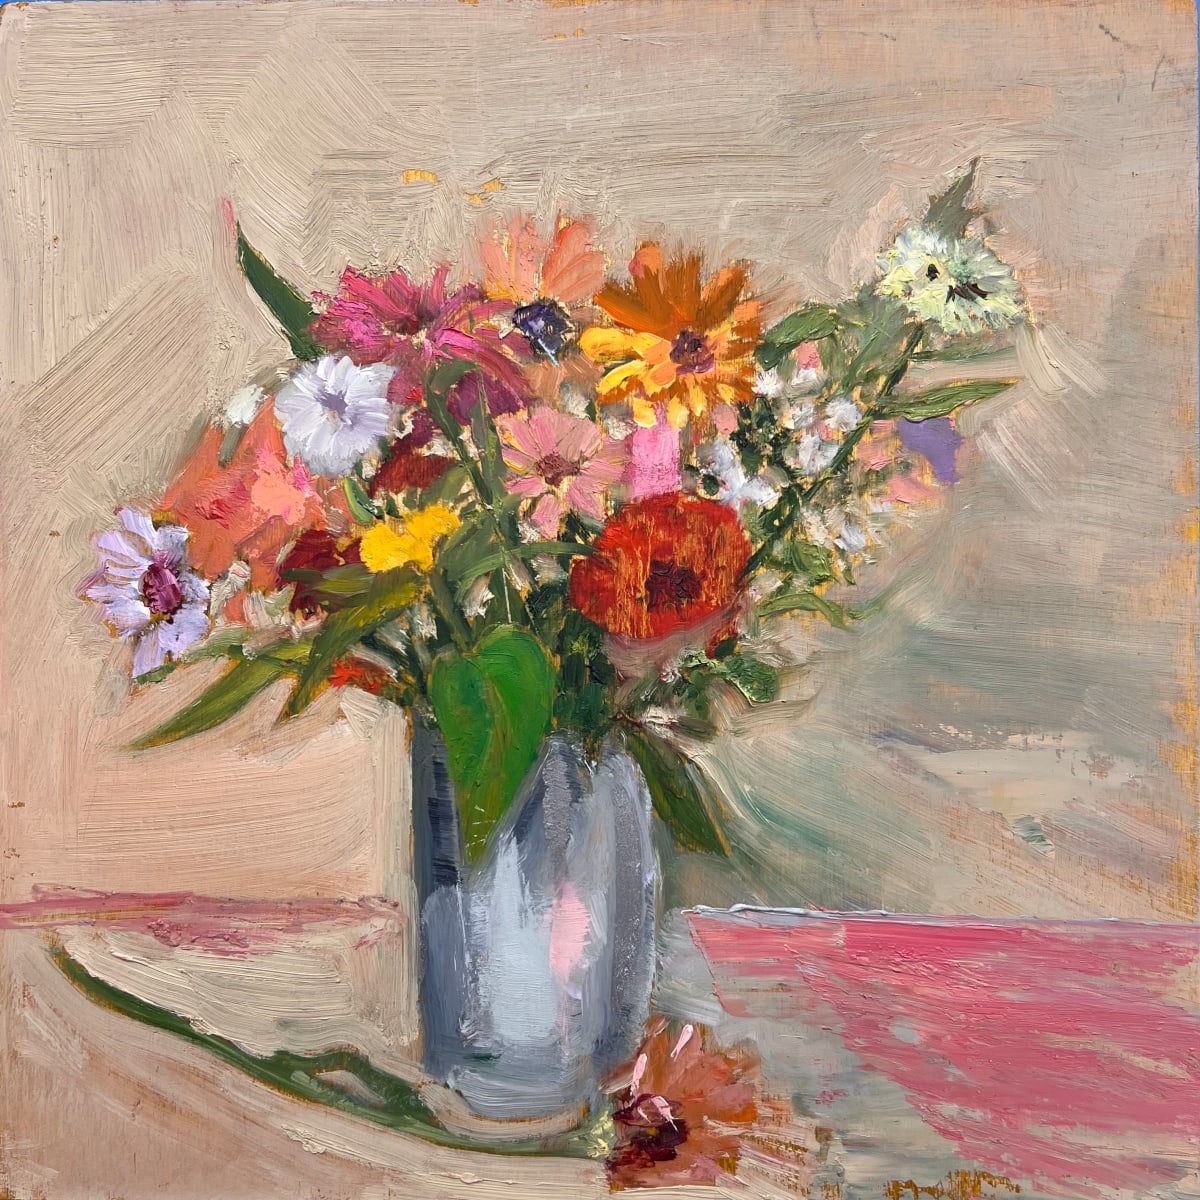 August Offering by Julia Chandler Lawing  Image: A visit to a country flower farm in August yields a pretty bouquet. Oil on cradled wood panel. 